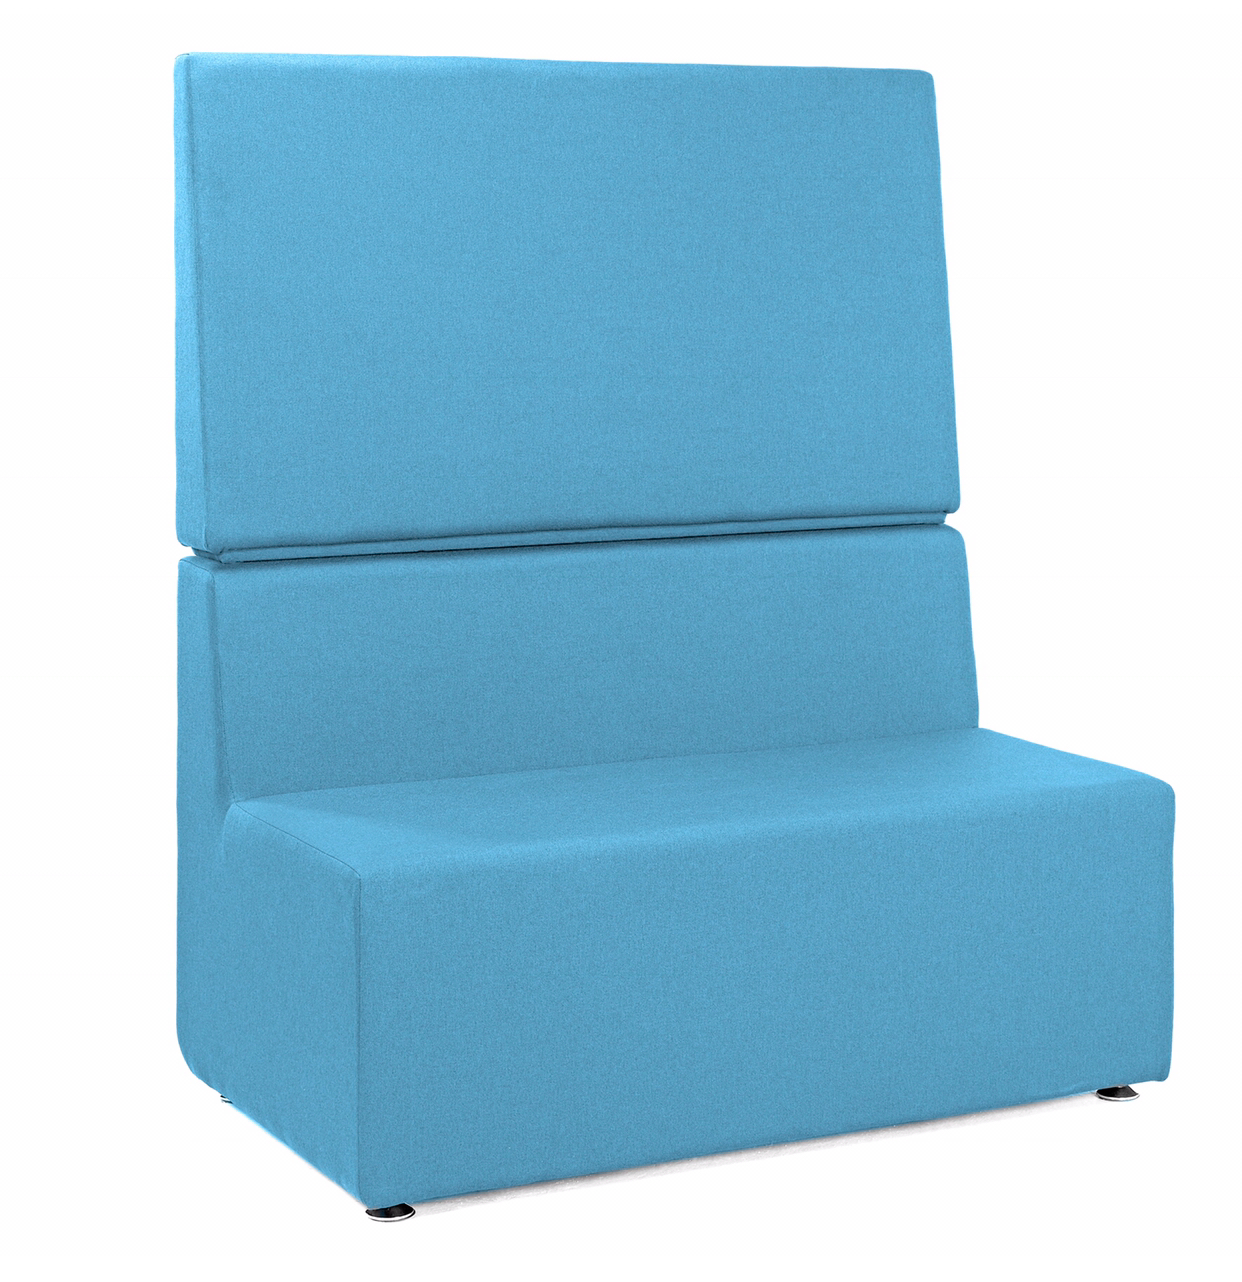 Special Booth double seater Medium back 1110 h x  1280 w x 730 d